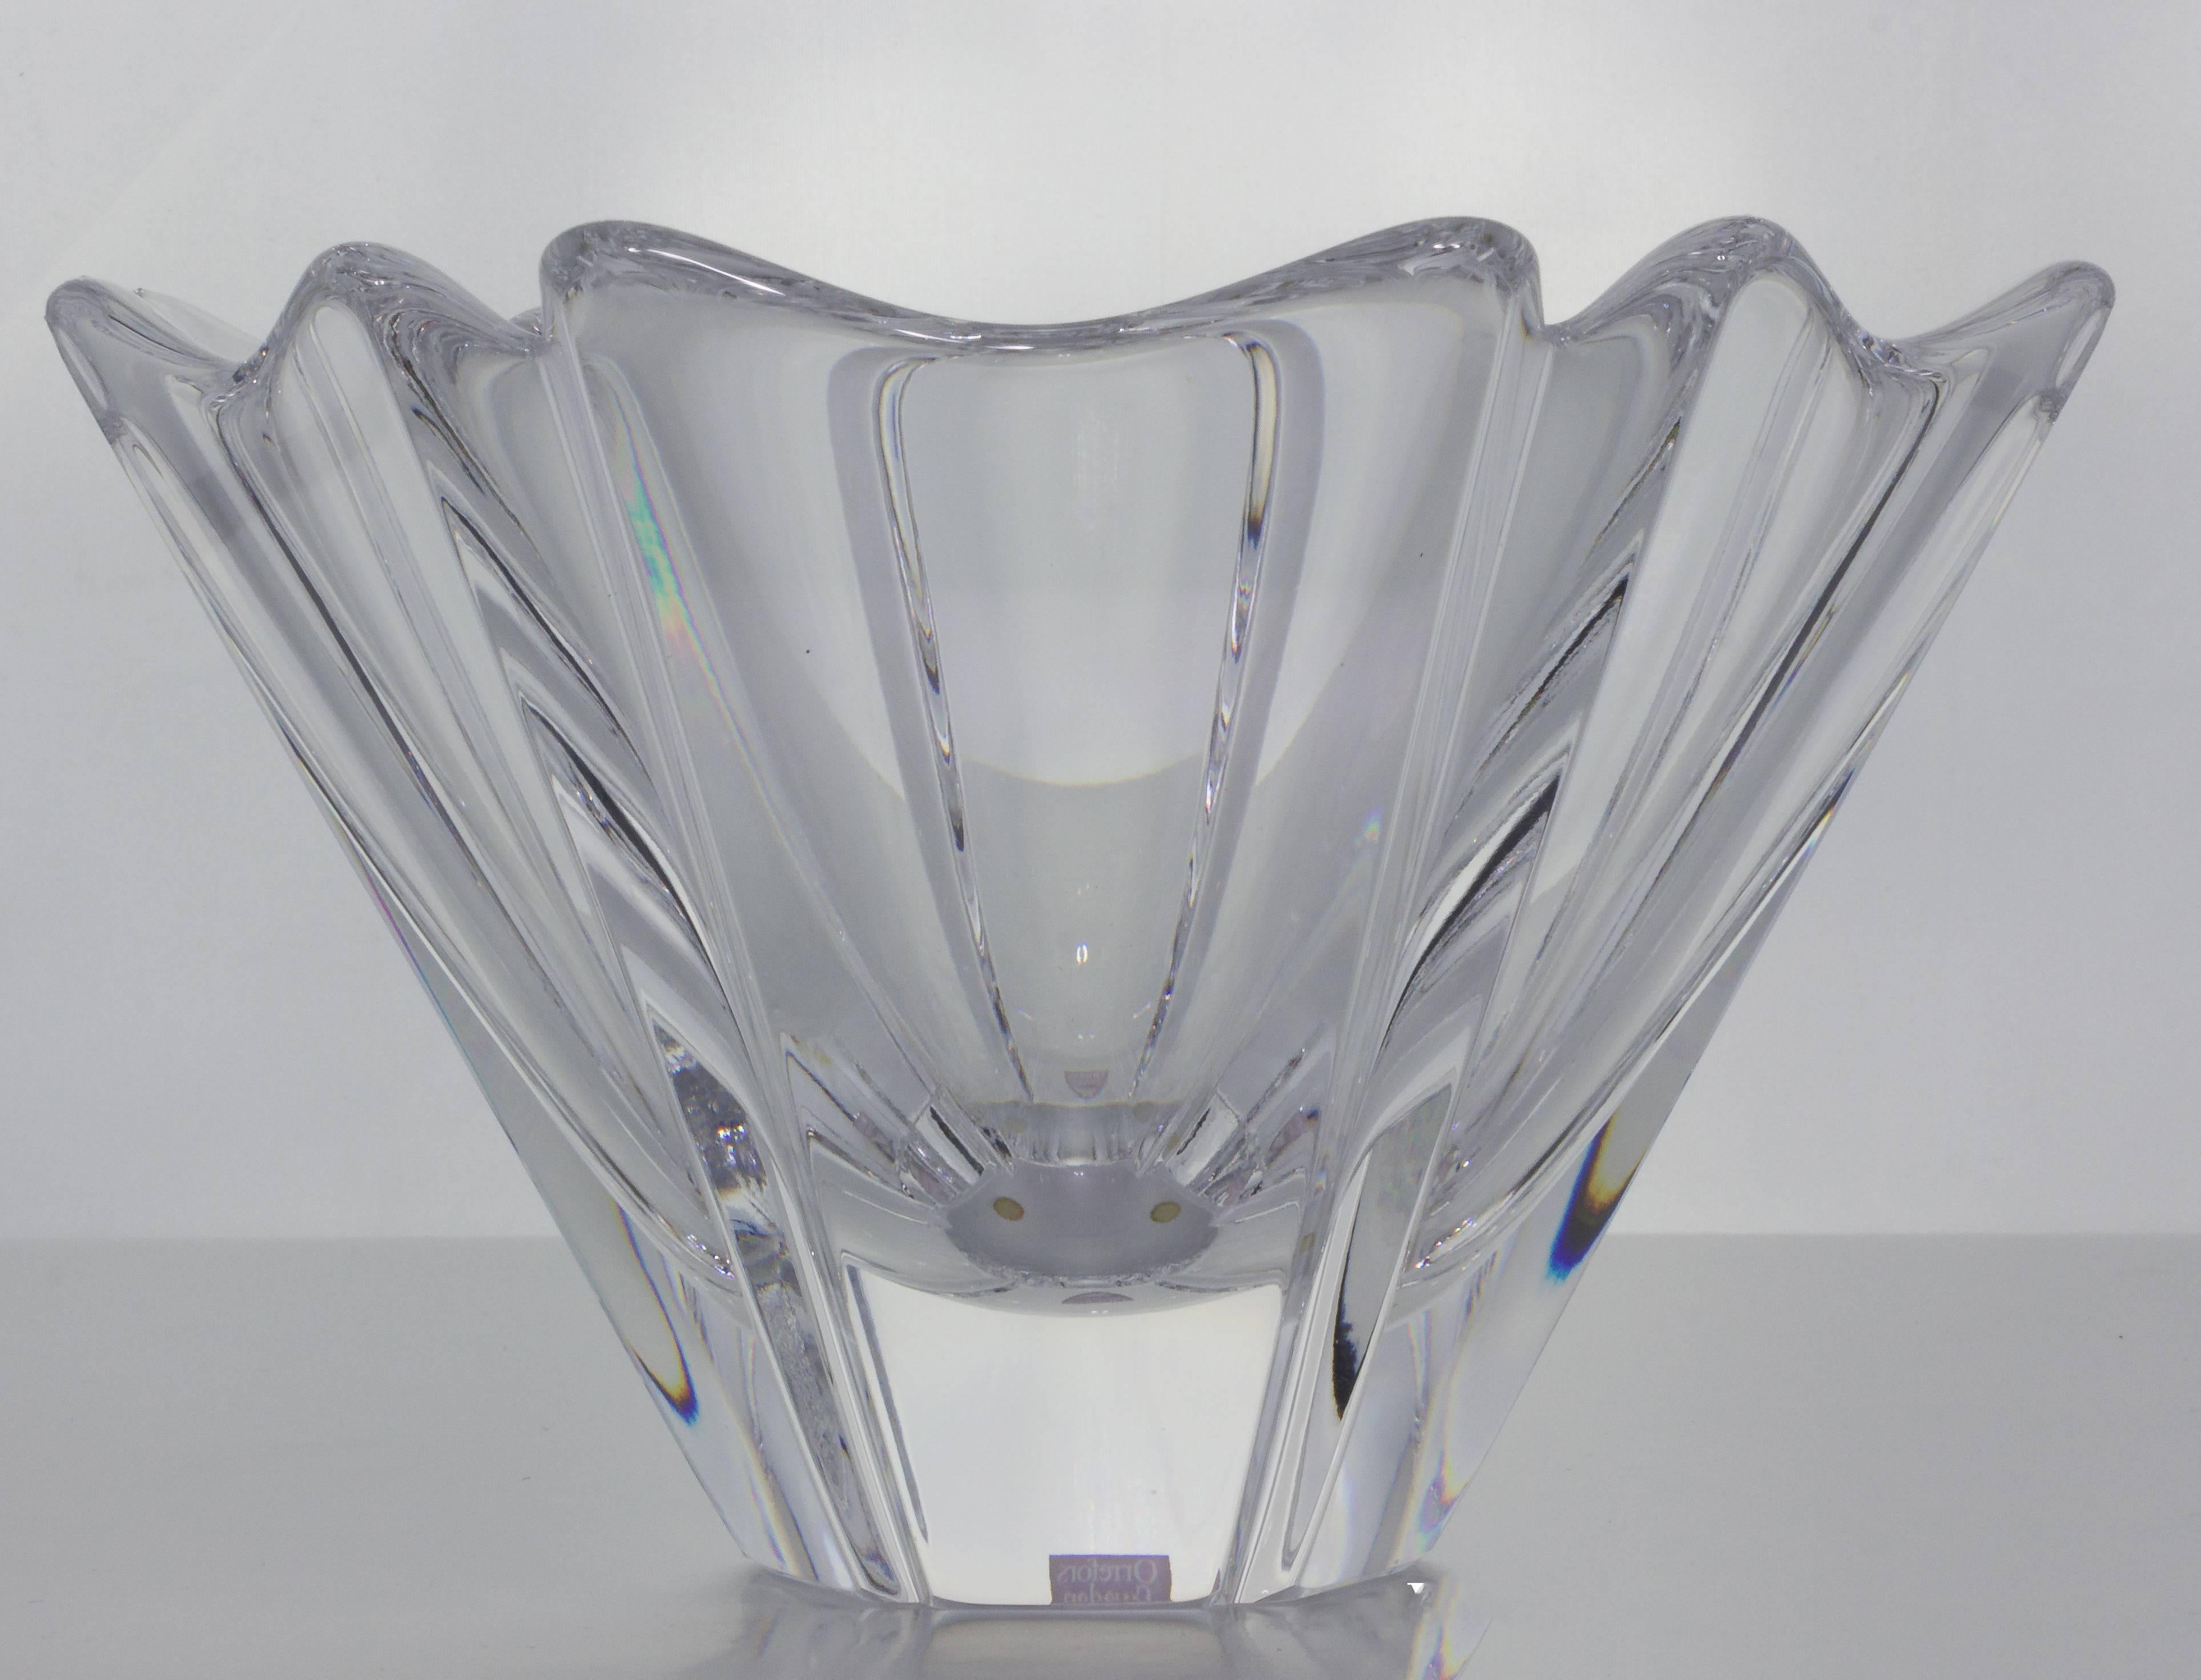 The elegant Swedish crystal petal bowl with six sides designed by Lars Hellsten for Orrefor is a stunning piece of art. The bowl is designed with exquisite attention to detail, with a unique six-sided shape that adds to its beauty. The bowl was made